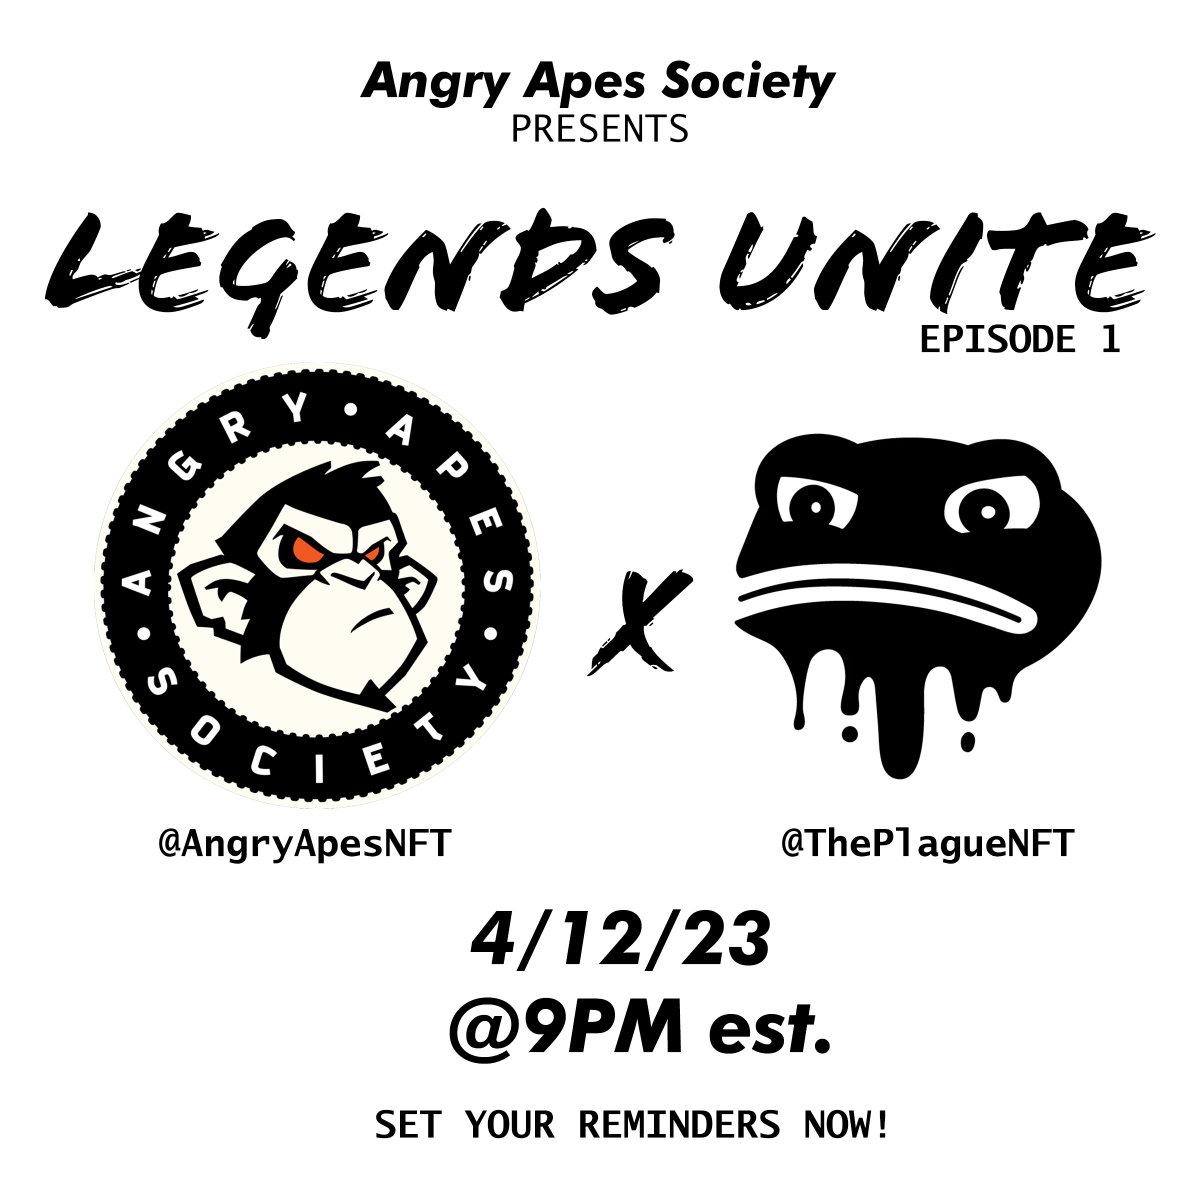 Join us for LEGENDS UNITE episode 1 feat. @ThePlagueNFT! 

👀#GIVEAWAY
1 LUCKY listener will win a FULL set of #AAS #NFTs!

Enter:
💎LIKE, RT and TAG 3
💎Must follow @AngryApesNFT @ThePlagueNFT, @AngryTeno & @NoServiceEth

MUST BE IN SPACE👇
twitter.com/i/spaces/1dRKZ…
#AngryApes